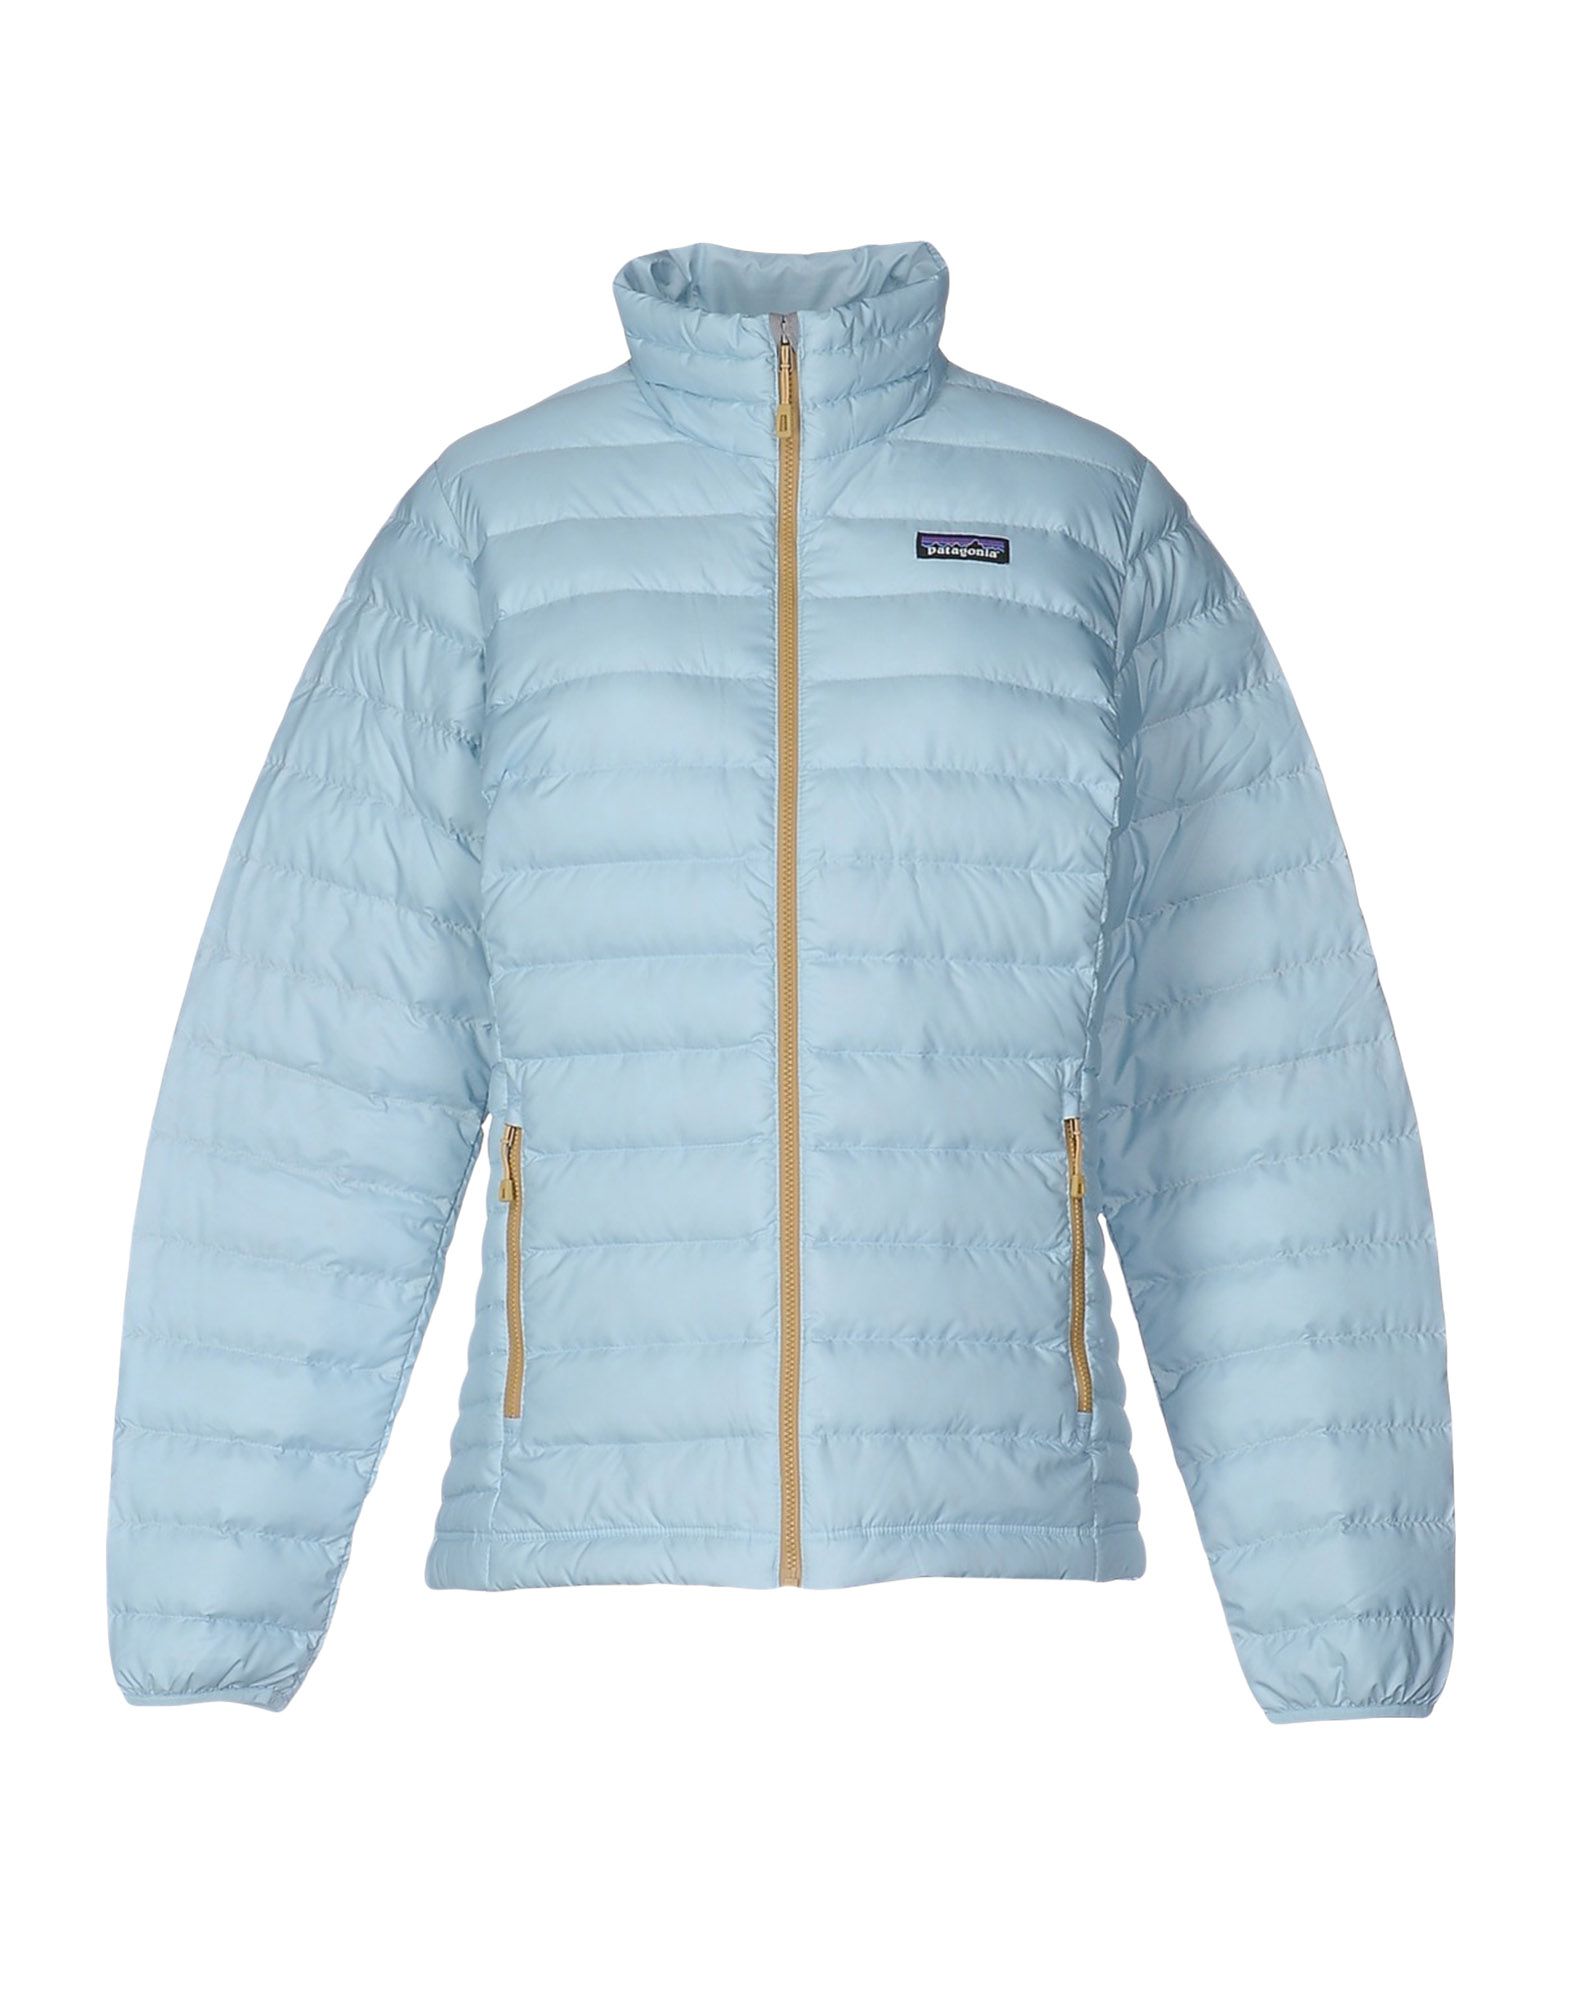 PATAGONIA Down jacket Sky blue Polyester women Coats and Jackets,Patagonia  pullover usa,patagonia sale backpack,Biggest Discount